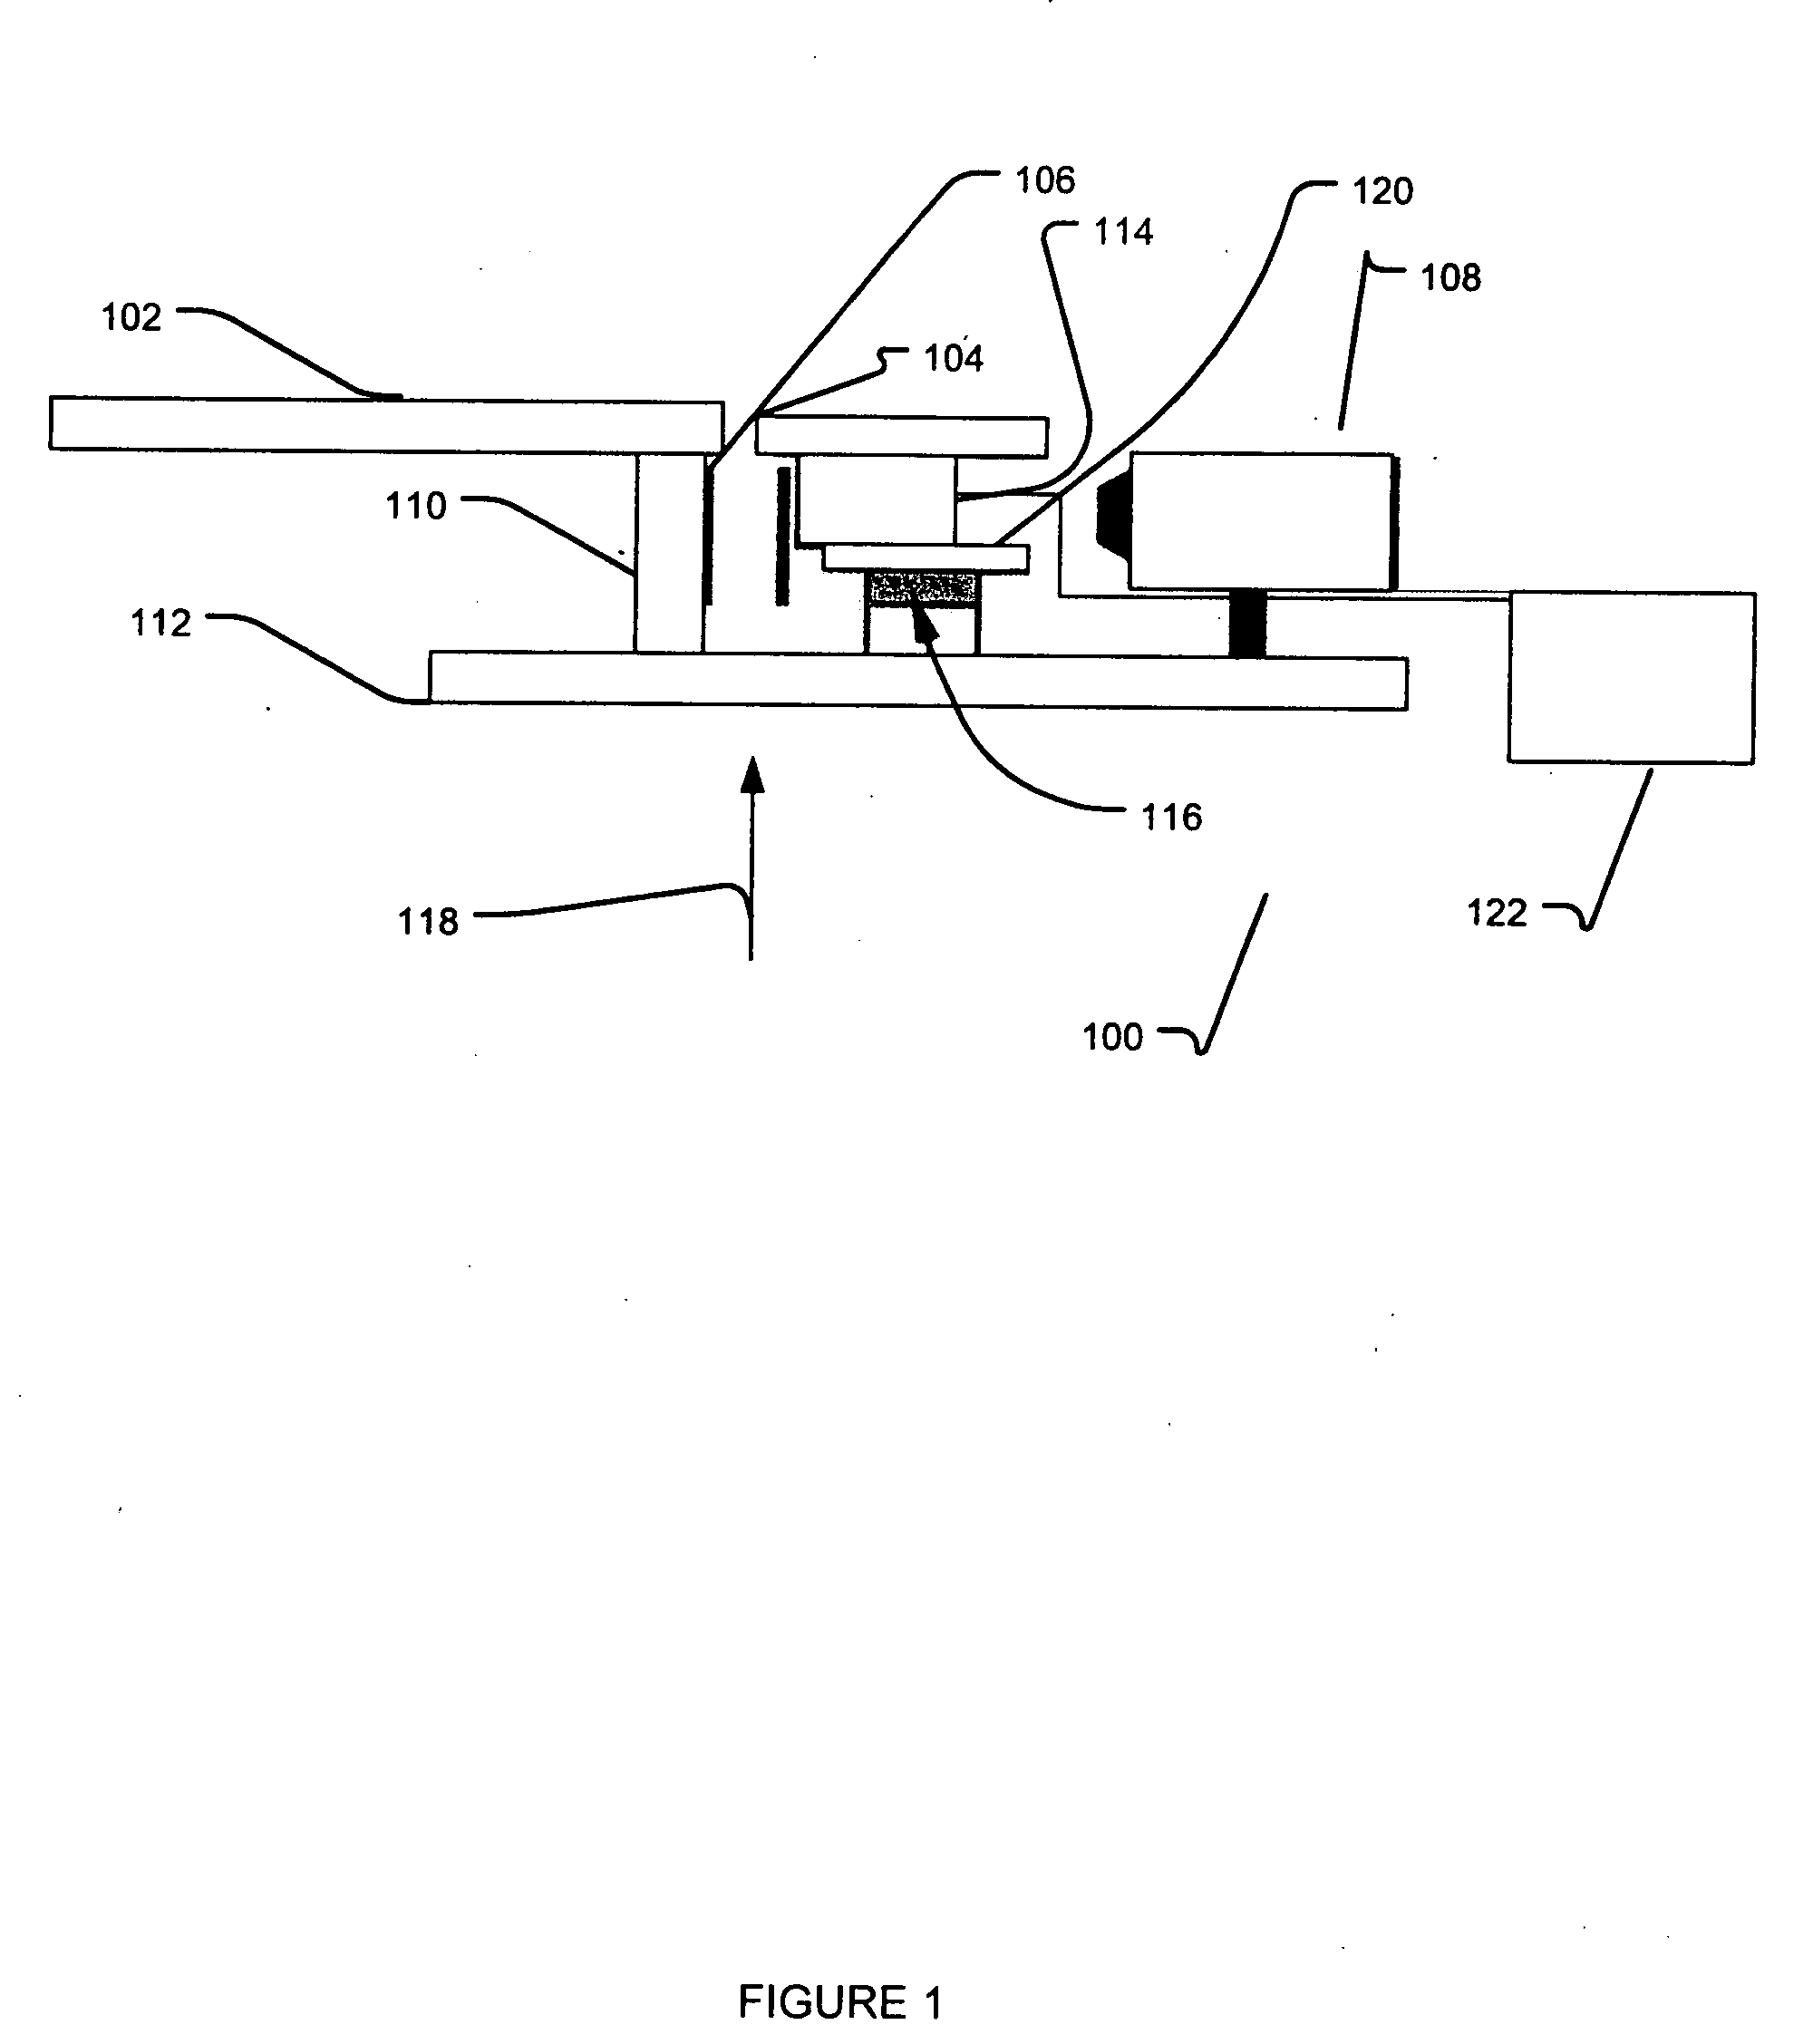 Method and apparatus for combined gamma/x-ray imaging in stereotactic biopsy